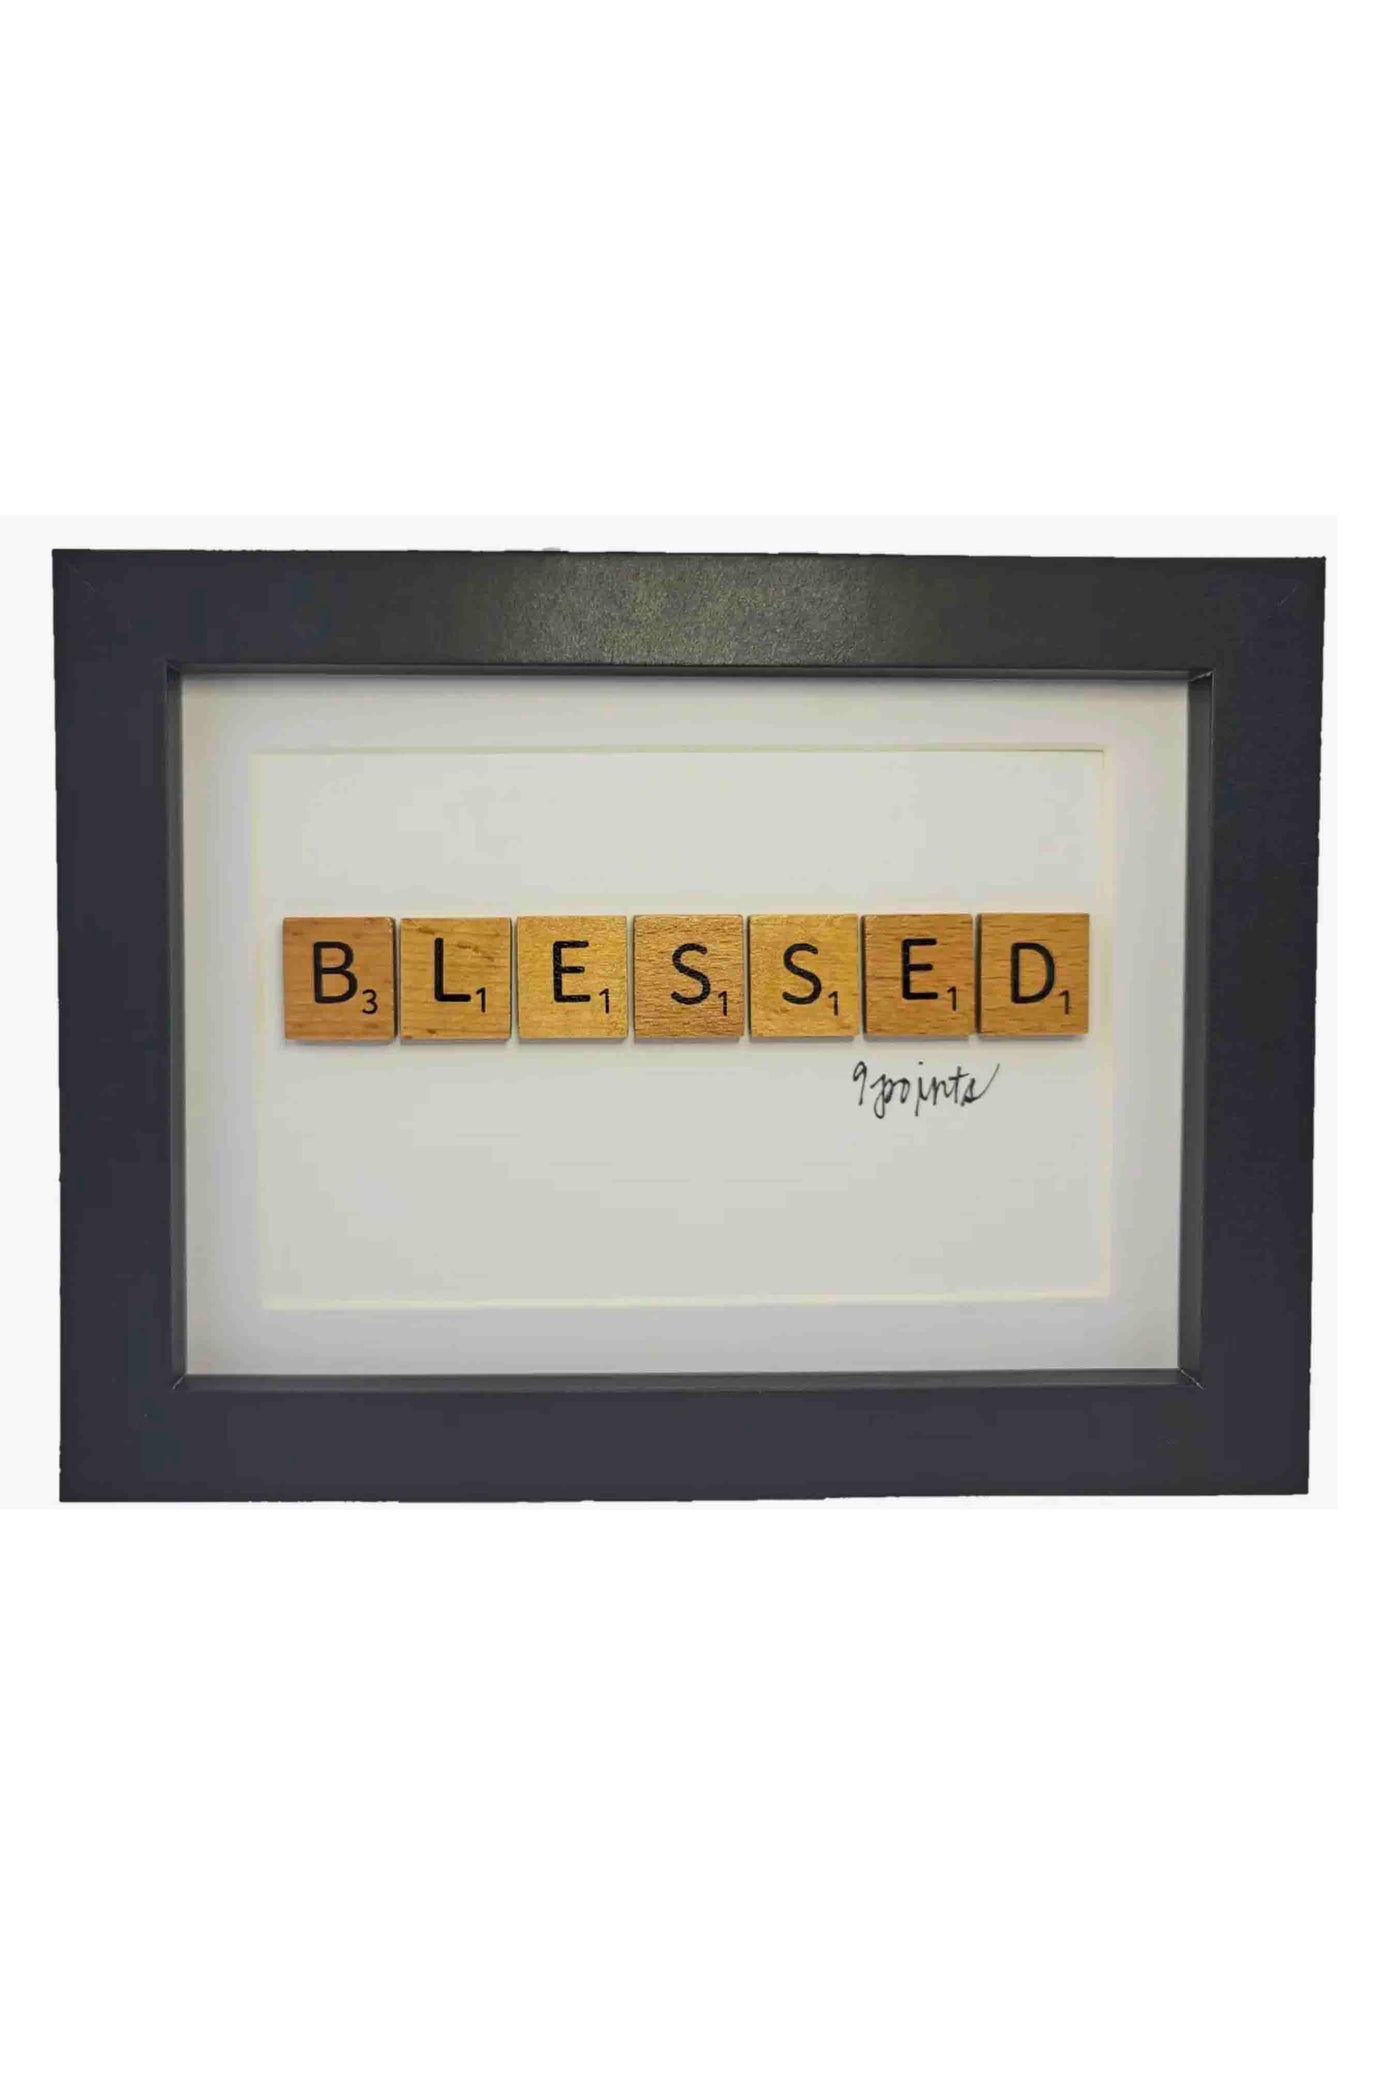 Blessed Scrabble Word Frame by Wordz in Framez